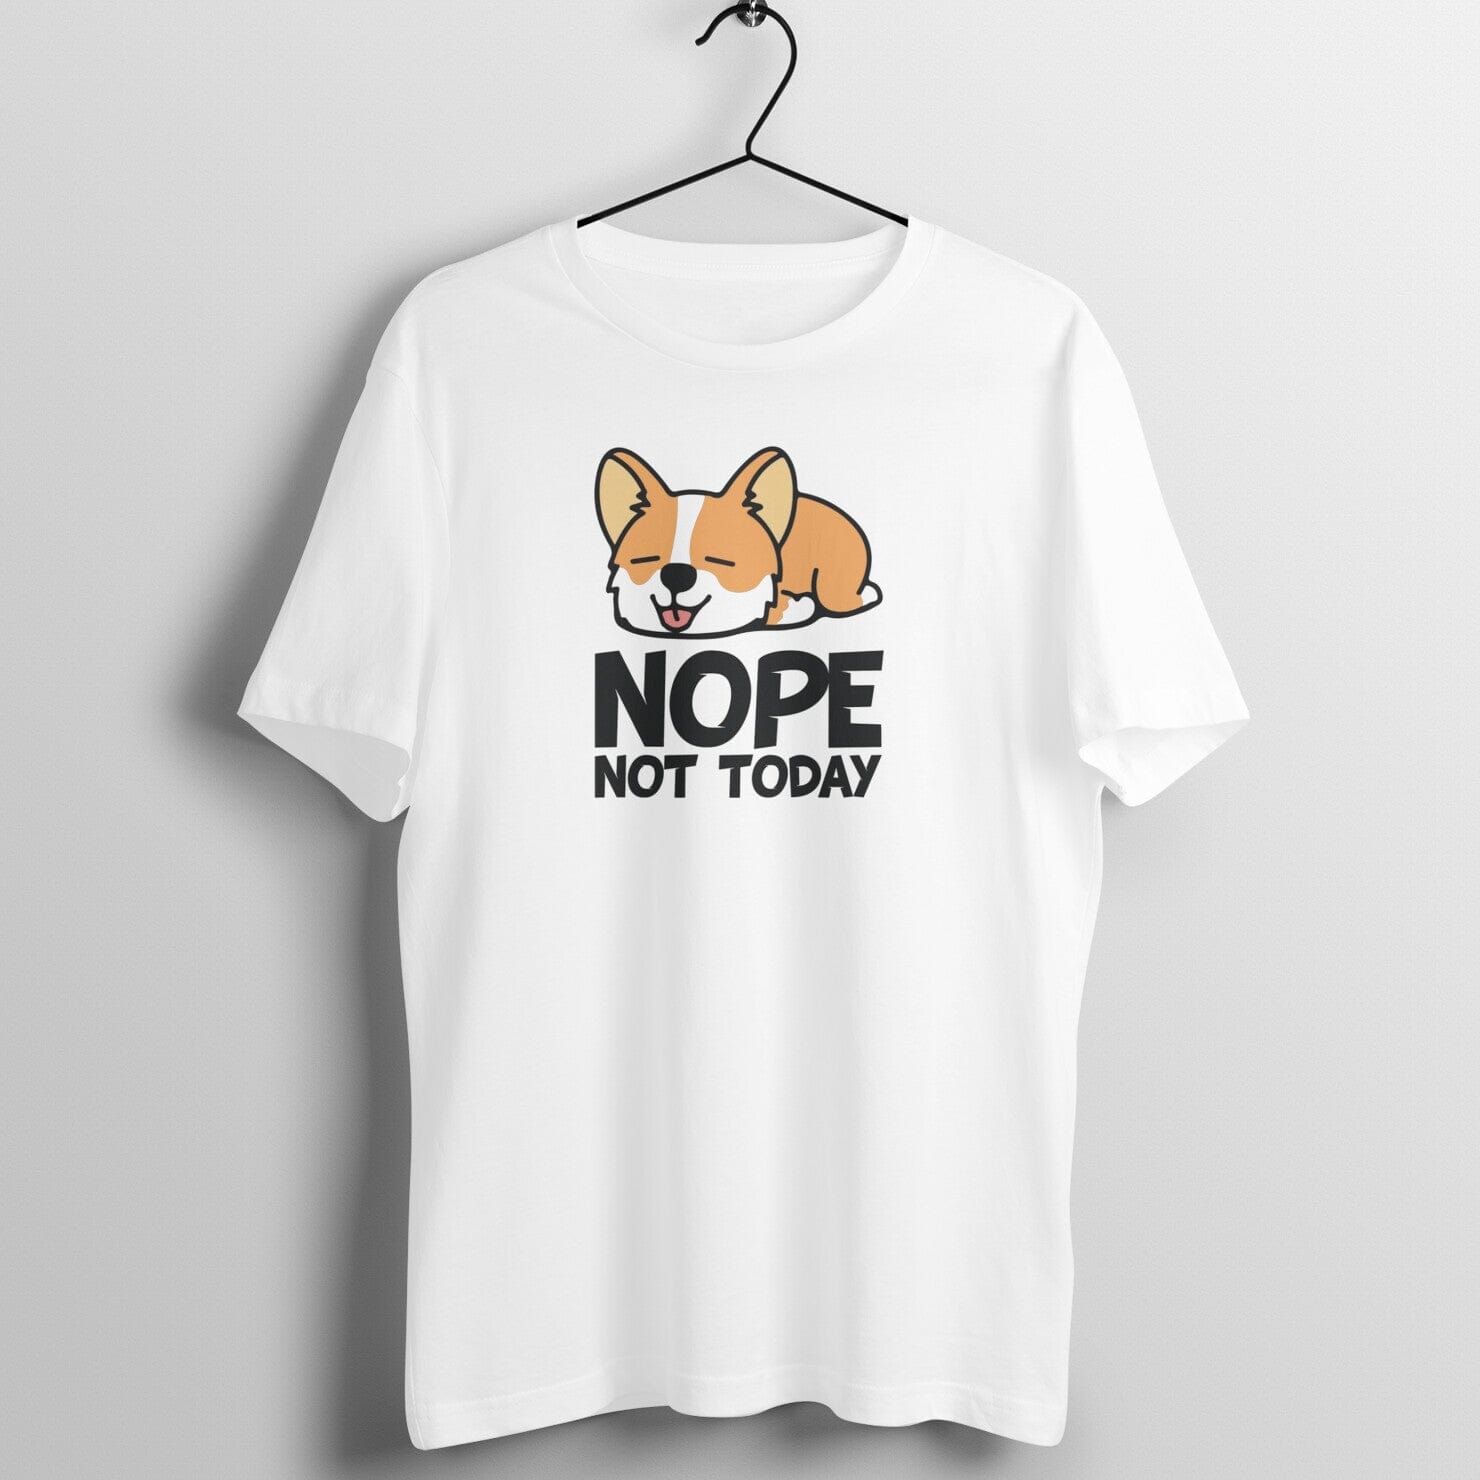 Nope Not Today Cute White T Shirt for Men and Women Printrove White S 